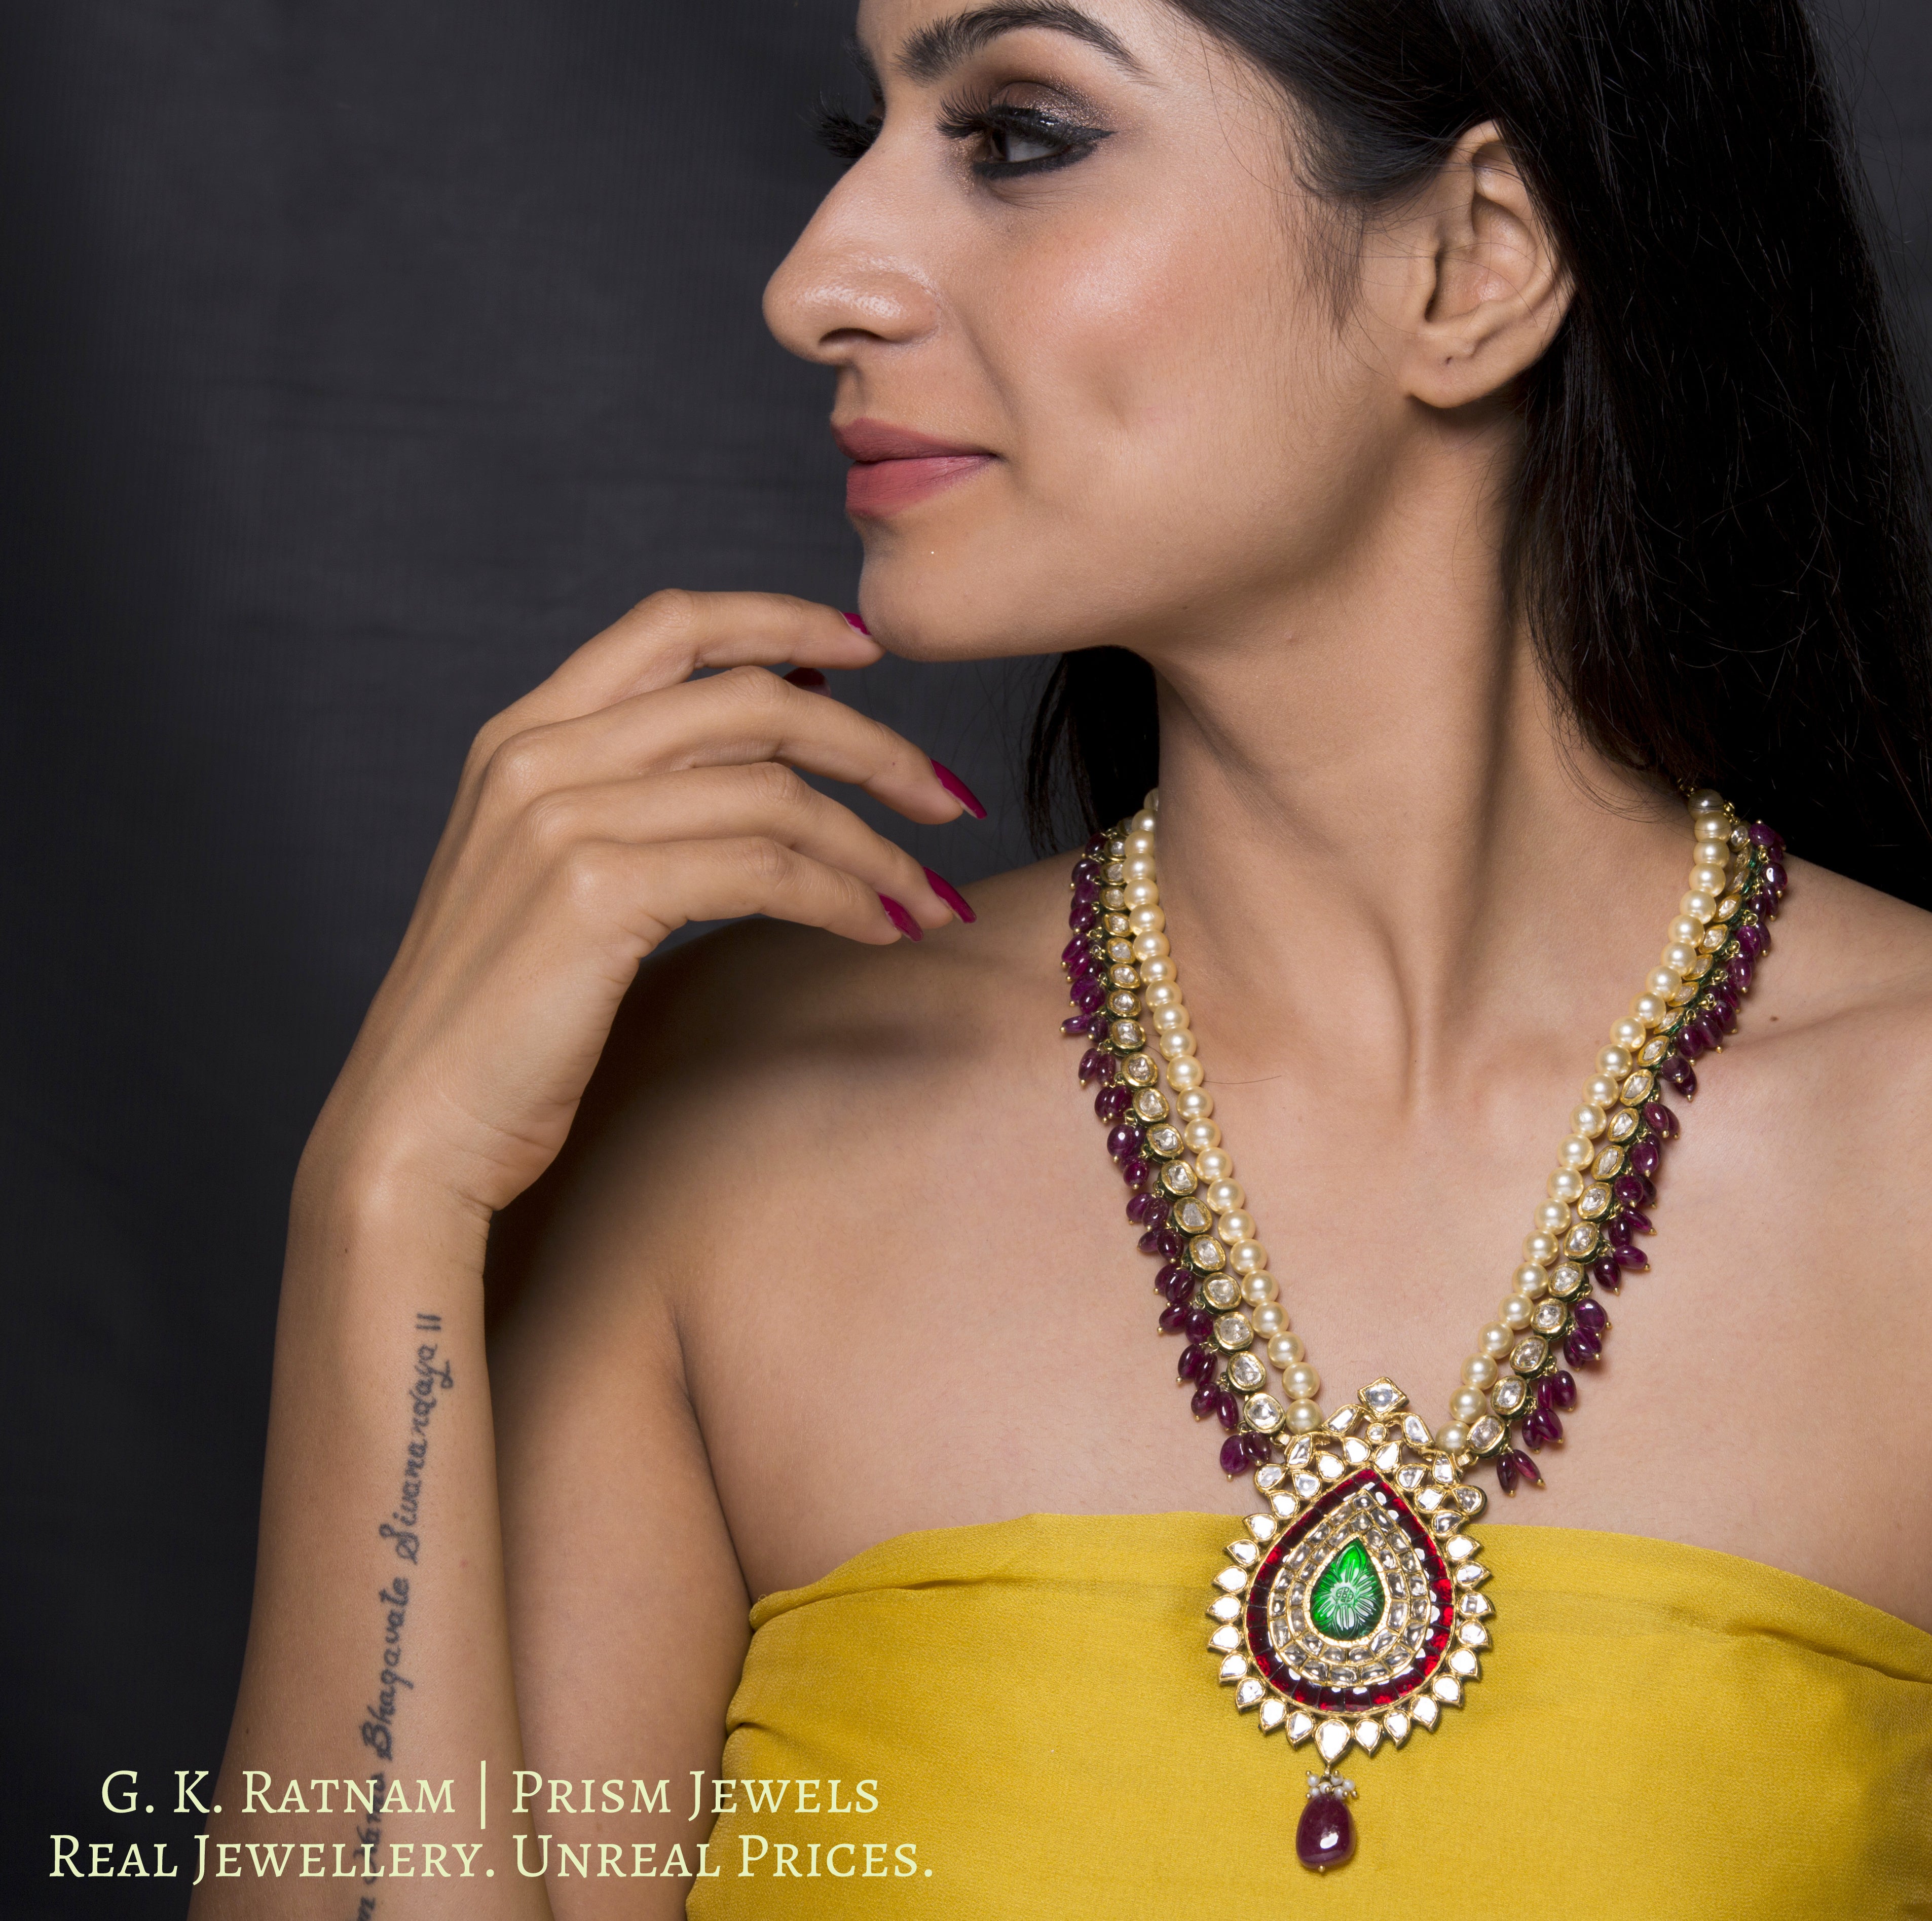 18k Gold and Diamond Polki pear-shaped Pendant strung to uncut ovals enhanced with Natural Rubies - G. K. Ratnam